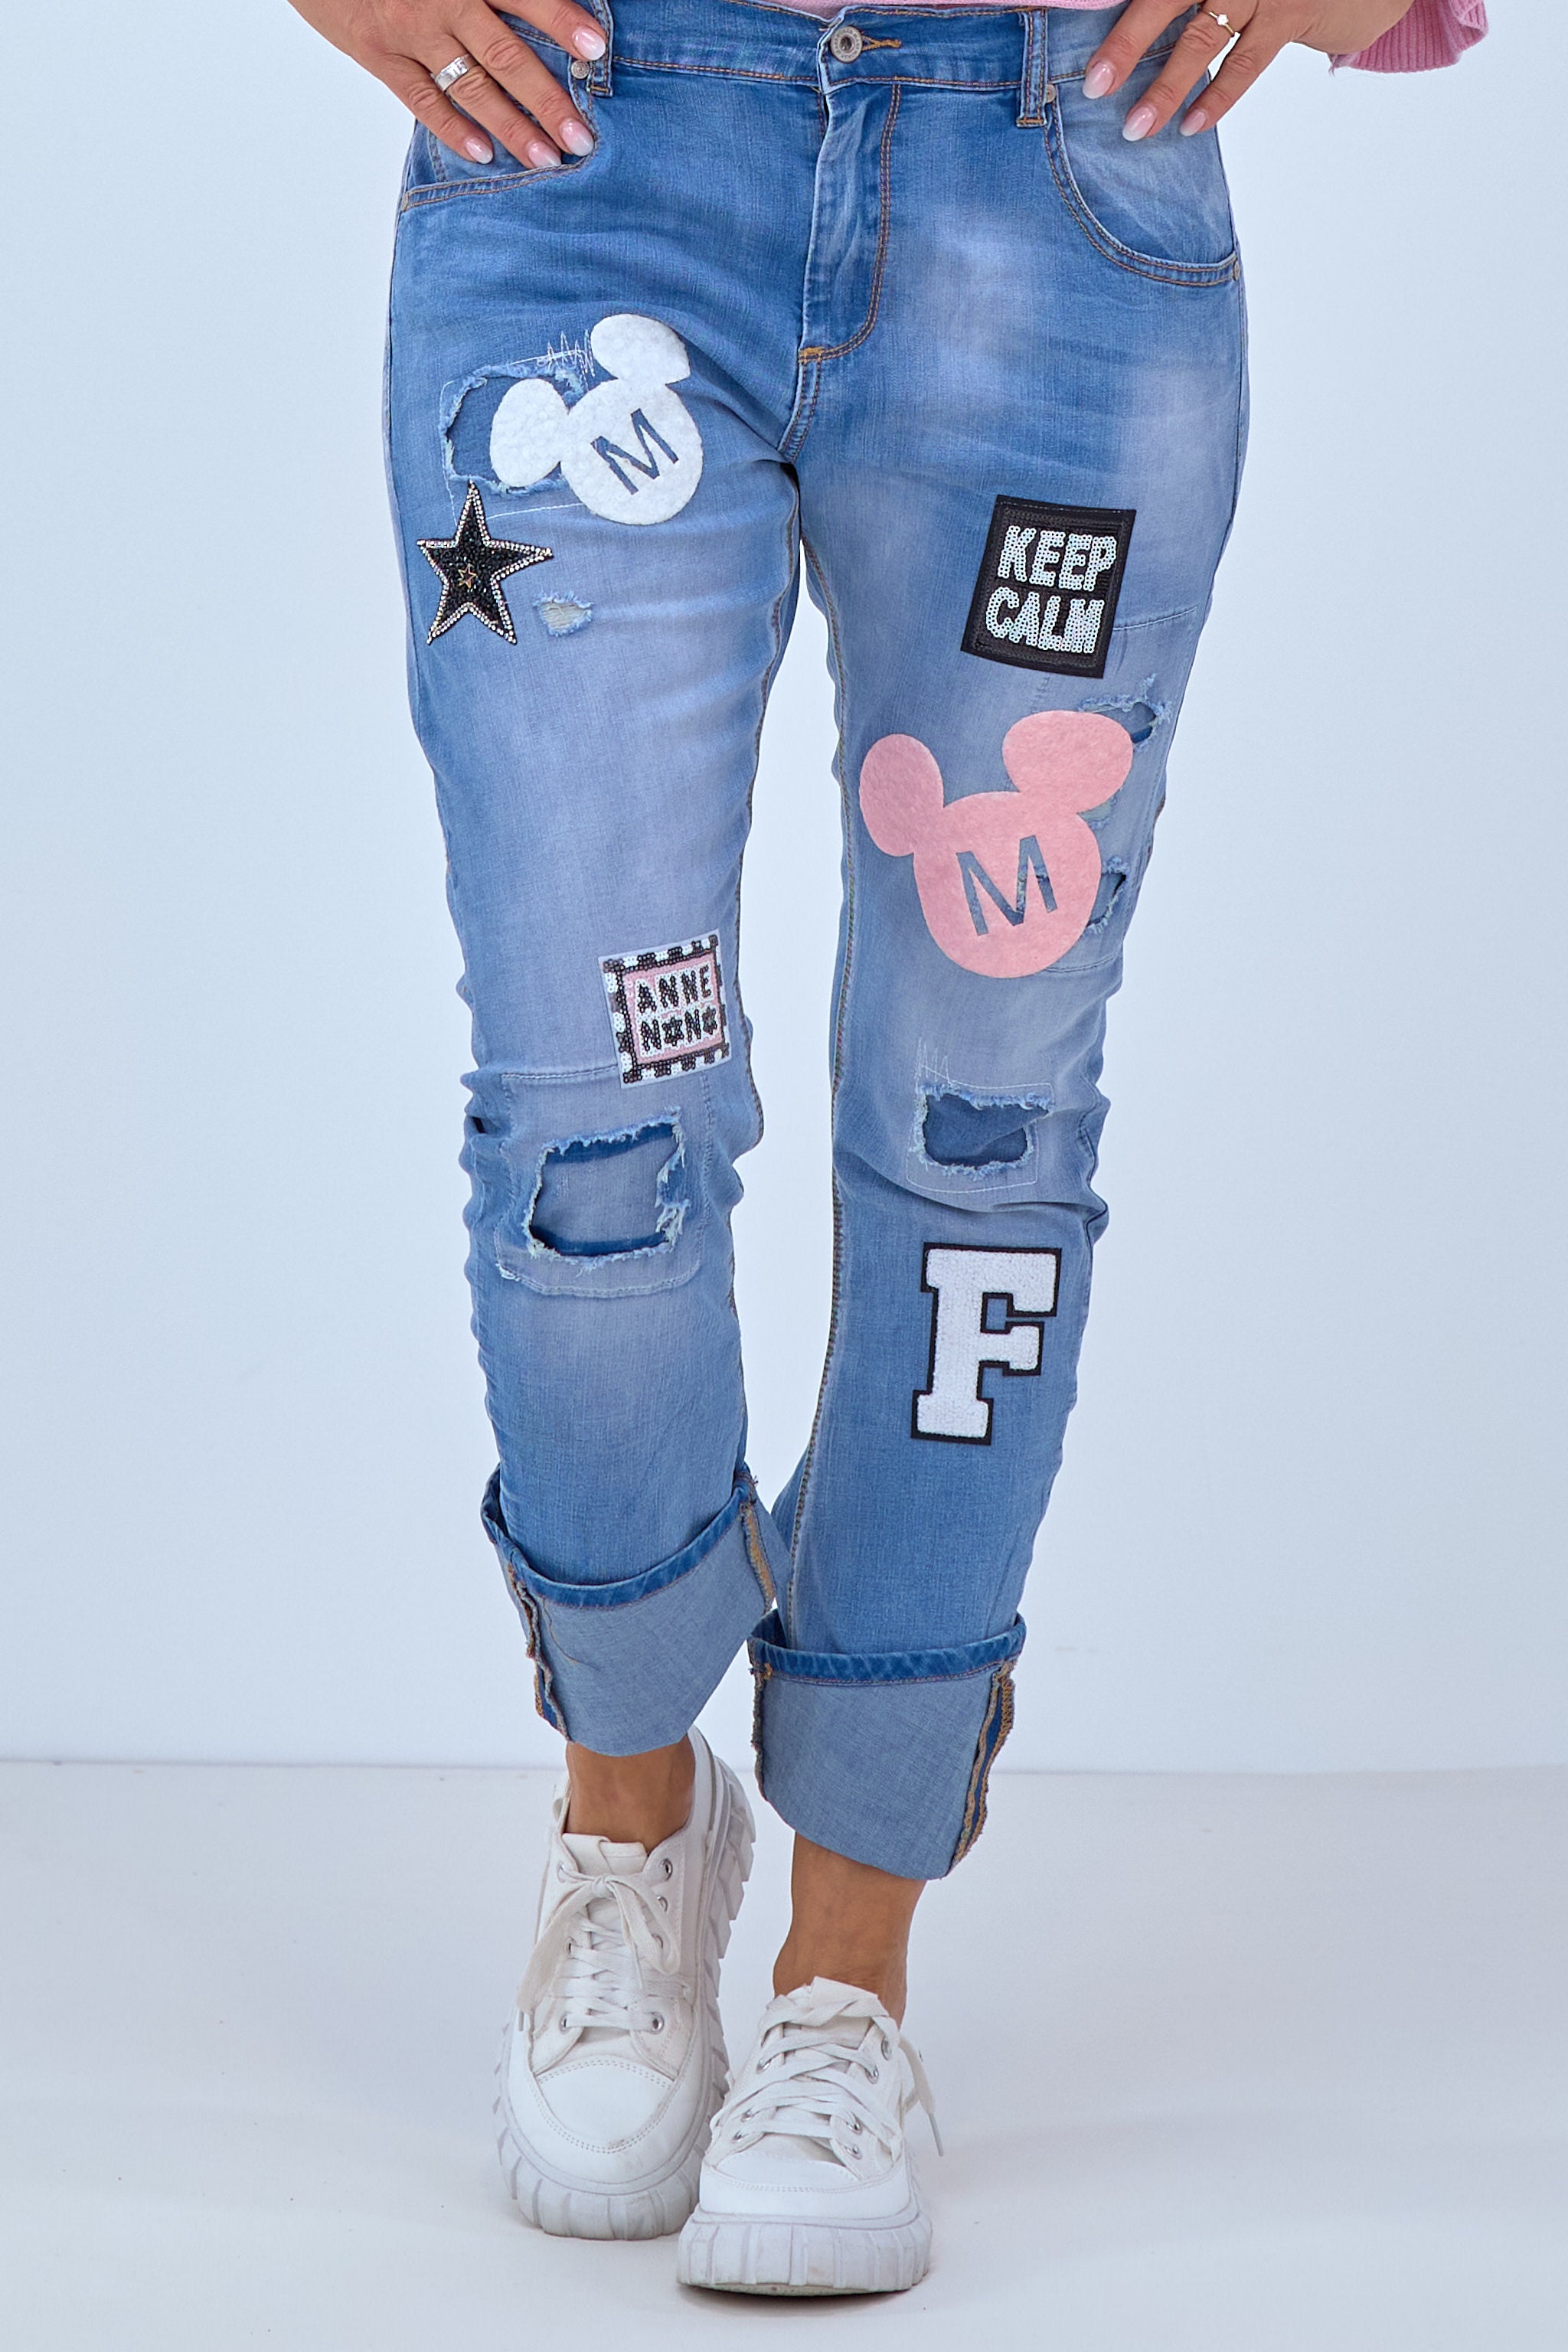 Jeans with flock and badges, denim